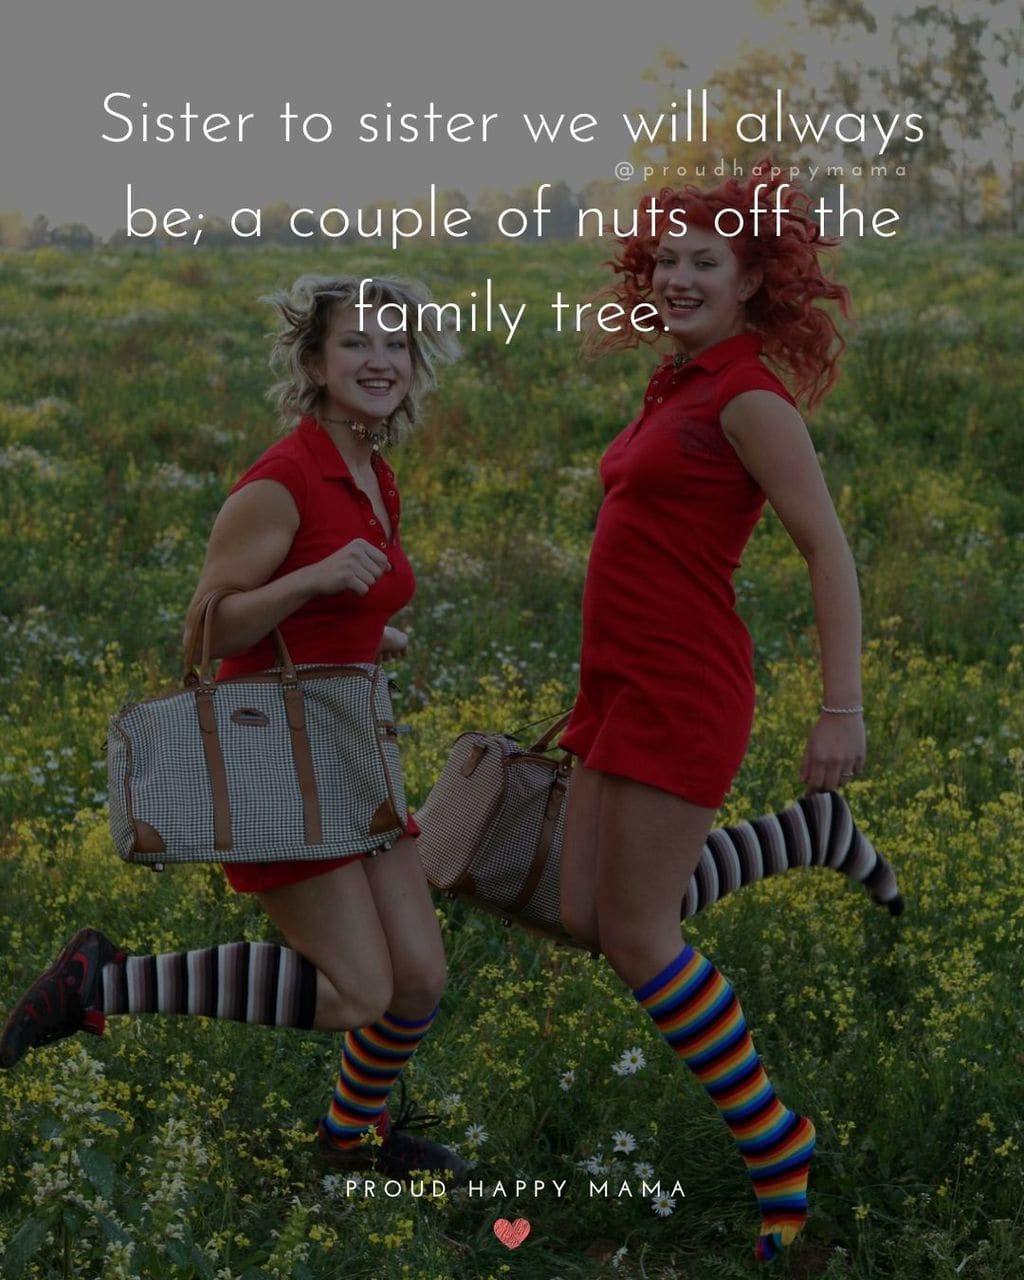 Sister Quotes - Sister to sister we will always be, a couple of nuts off the family tree.